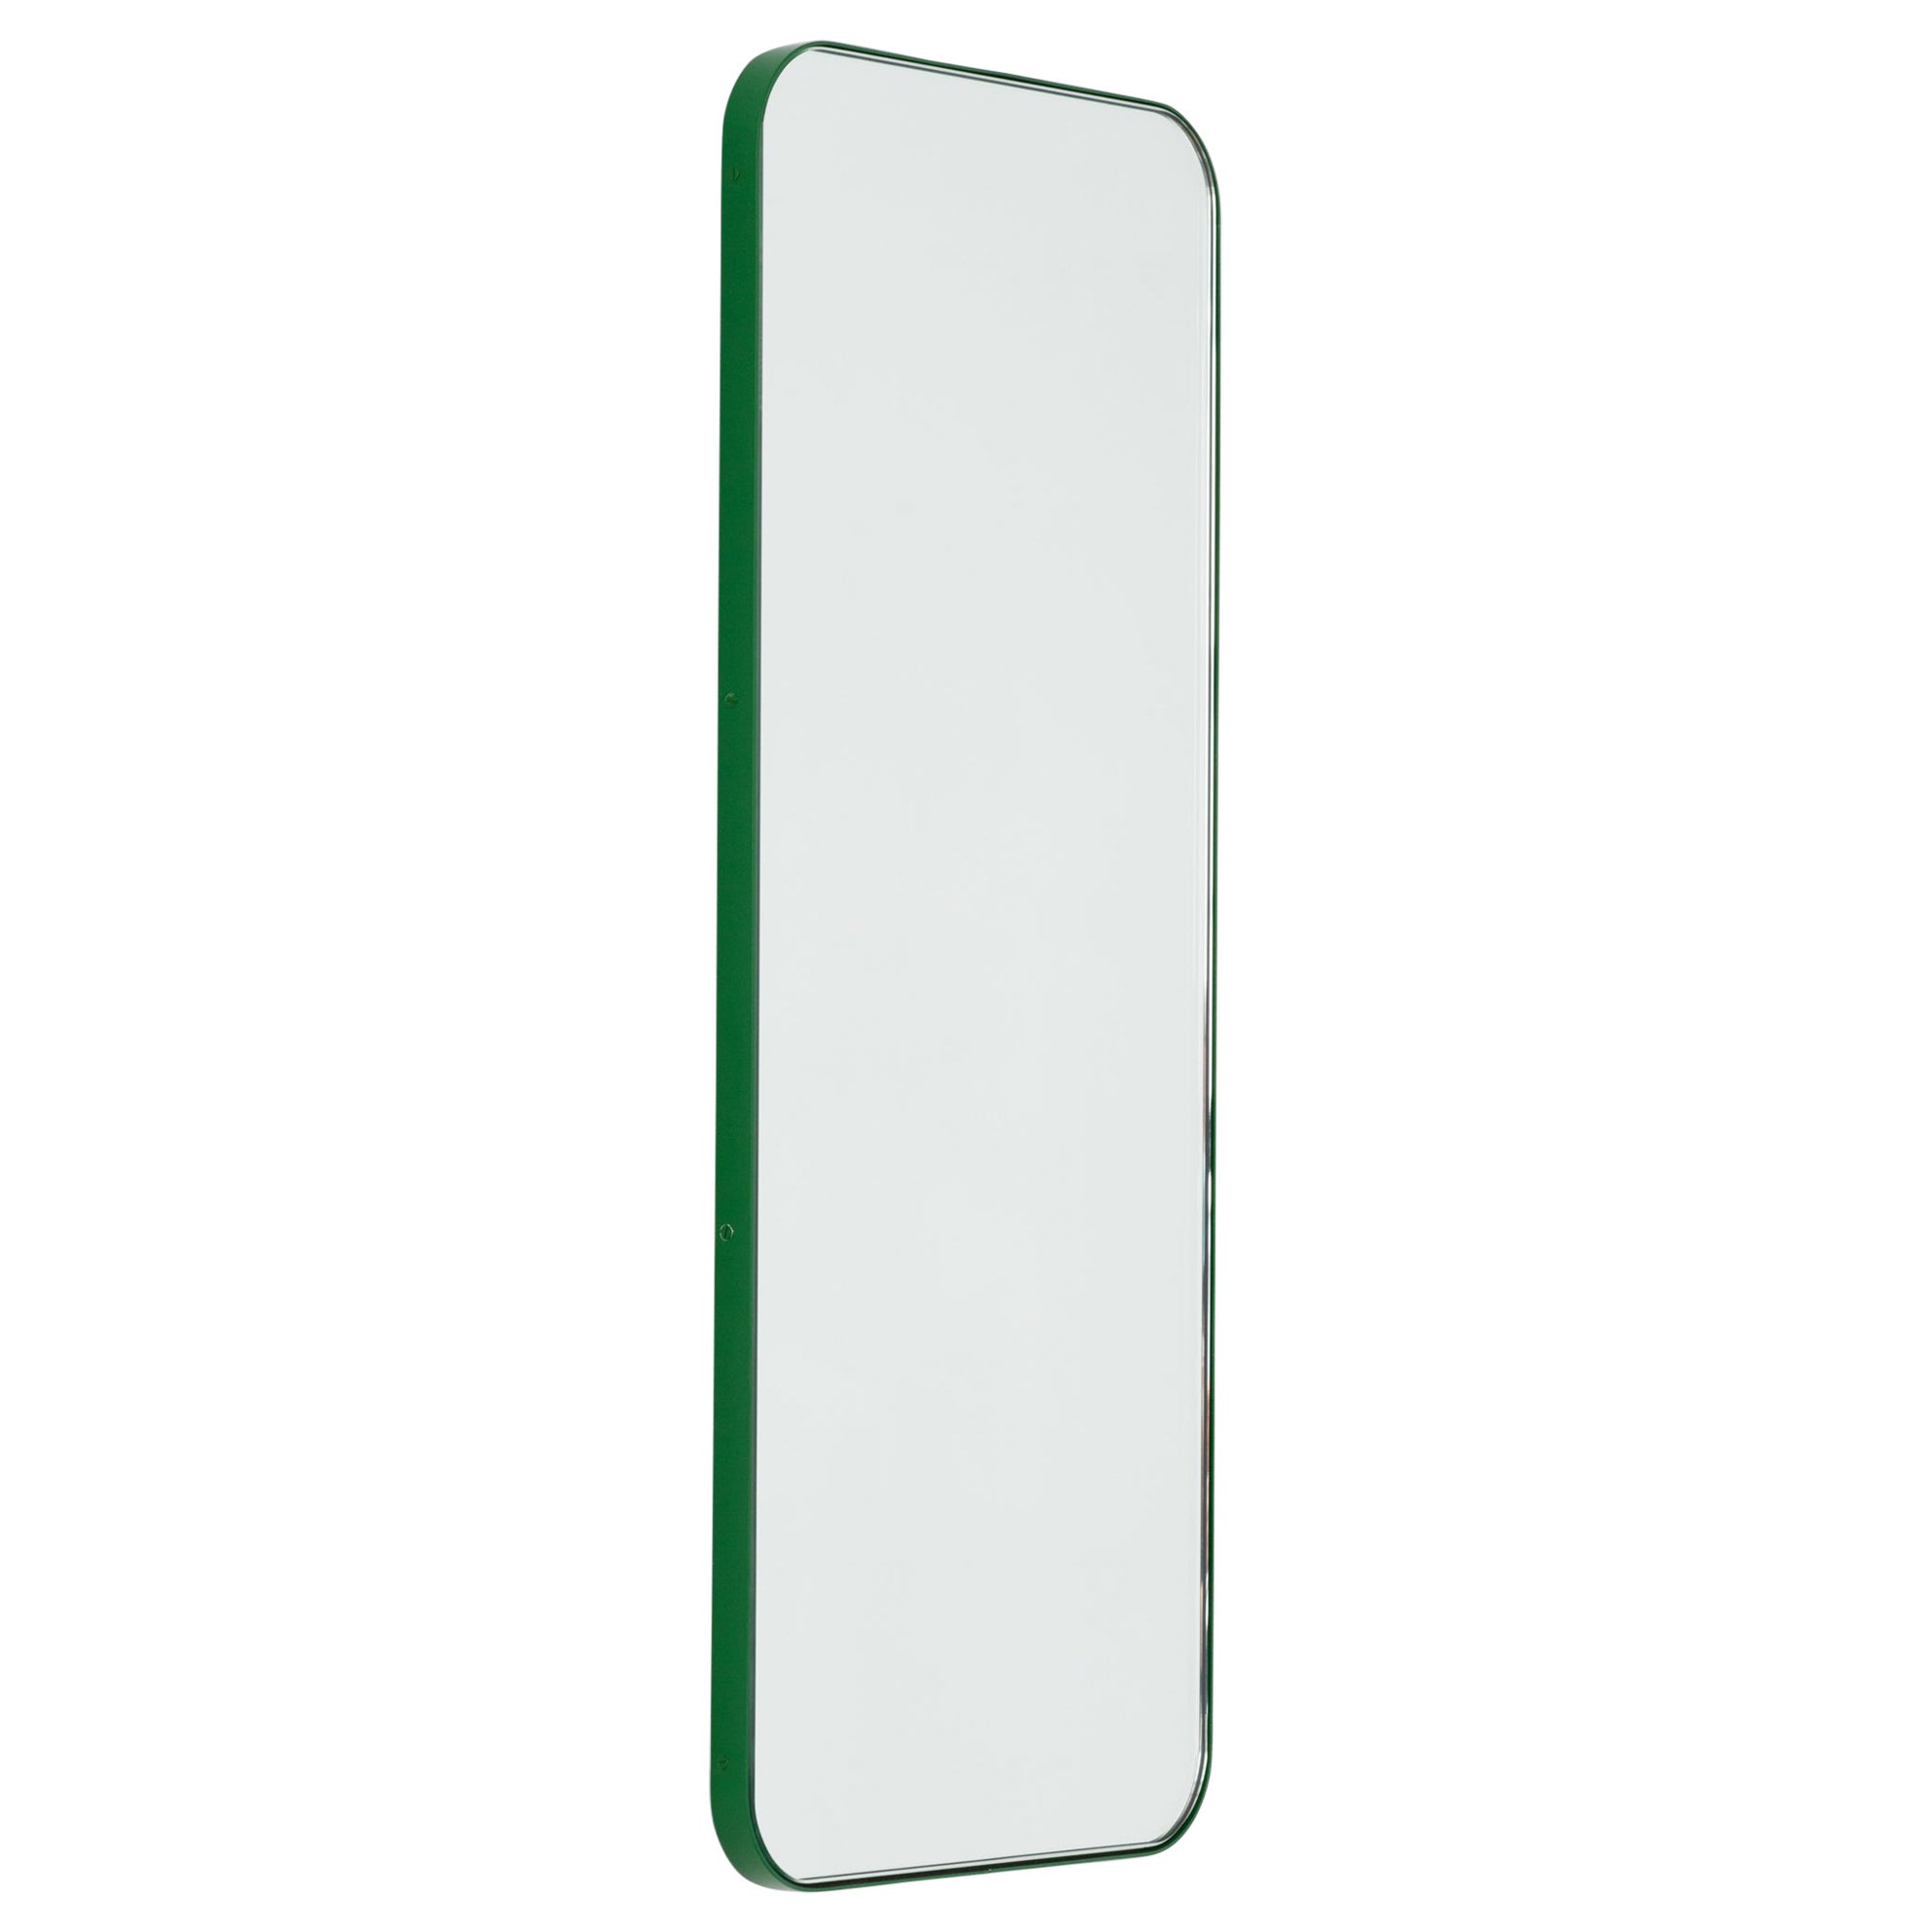 Quadris Rectangular Modern Mirror with a Green Frame, Large For Sale